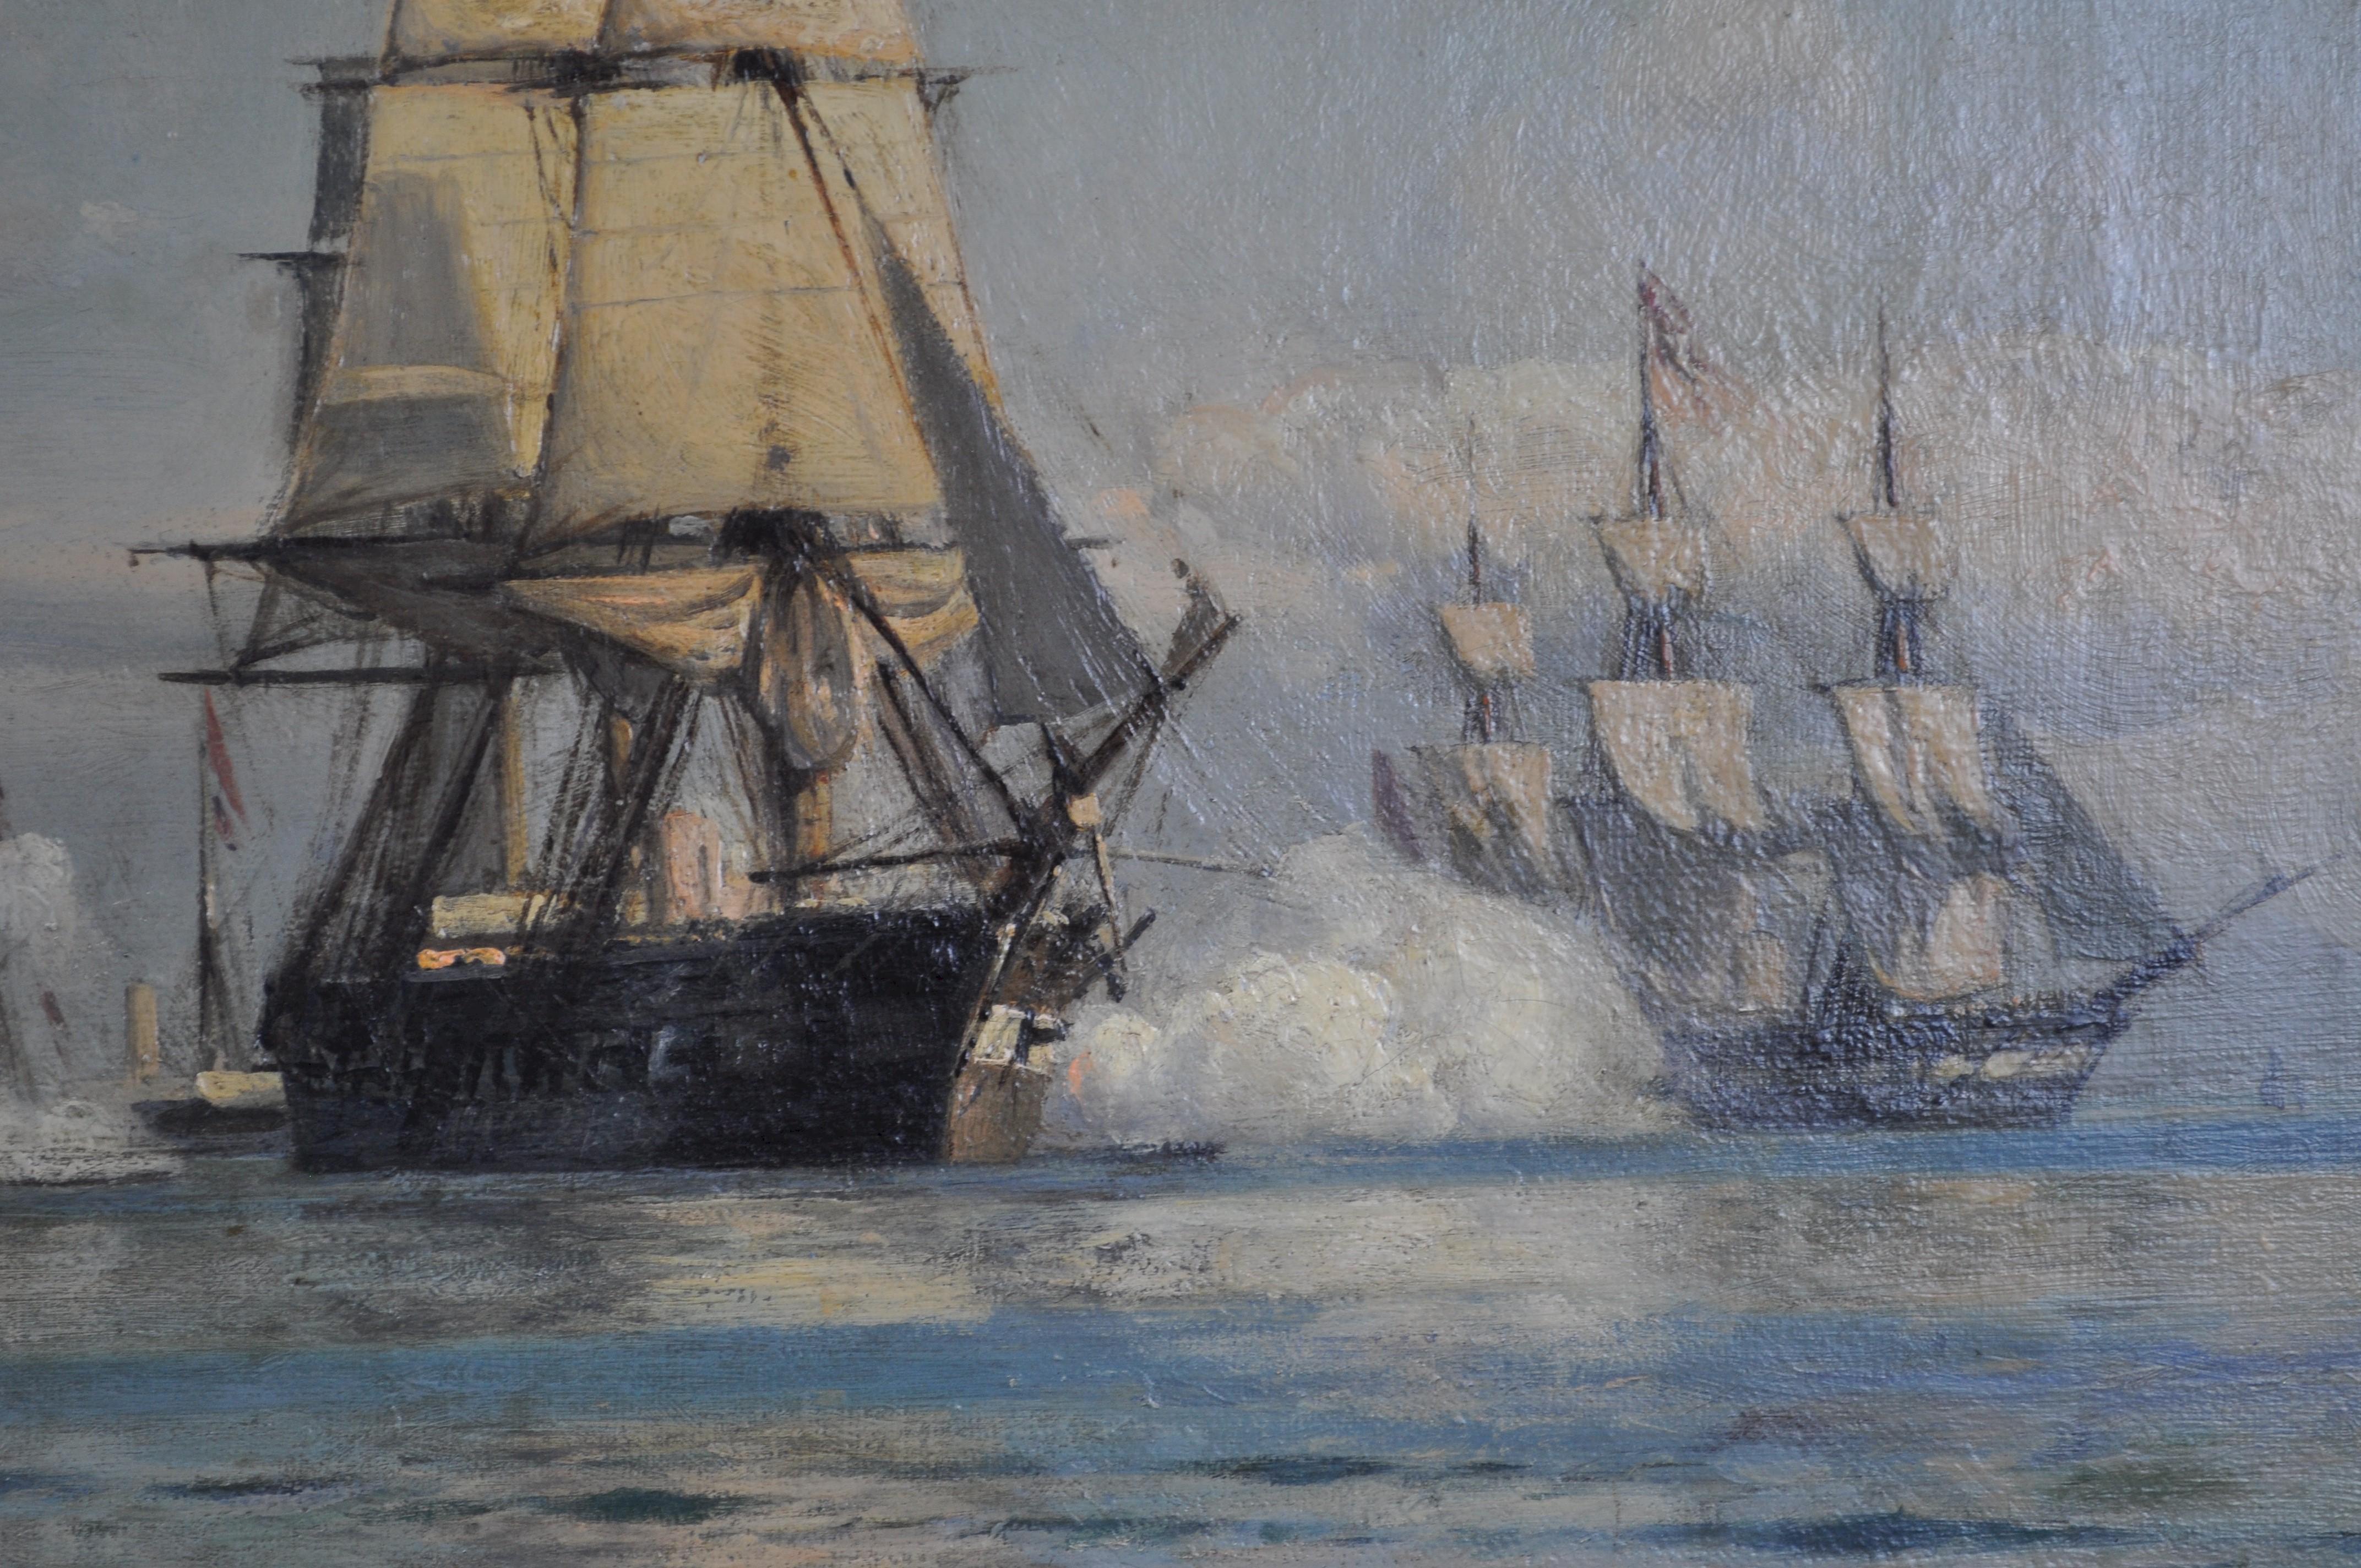 Danish naval vessels firing a salute - Realist Painting by Laurits Bernhard Holst